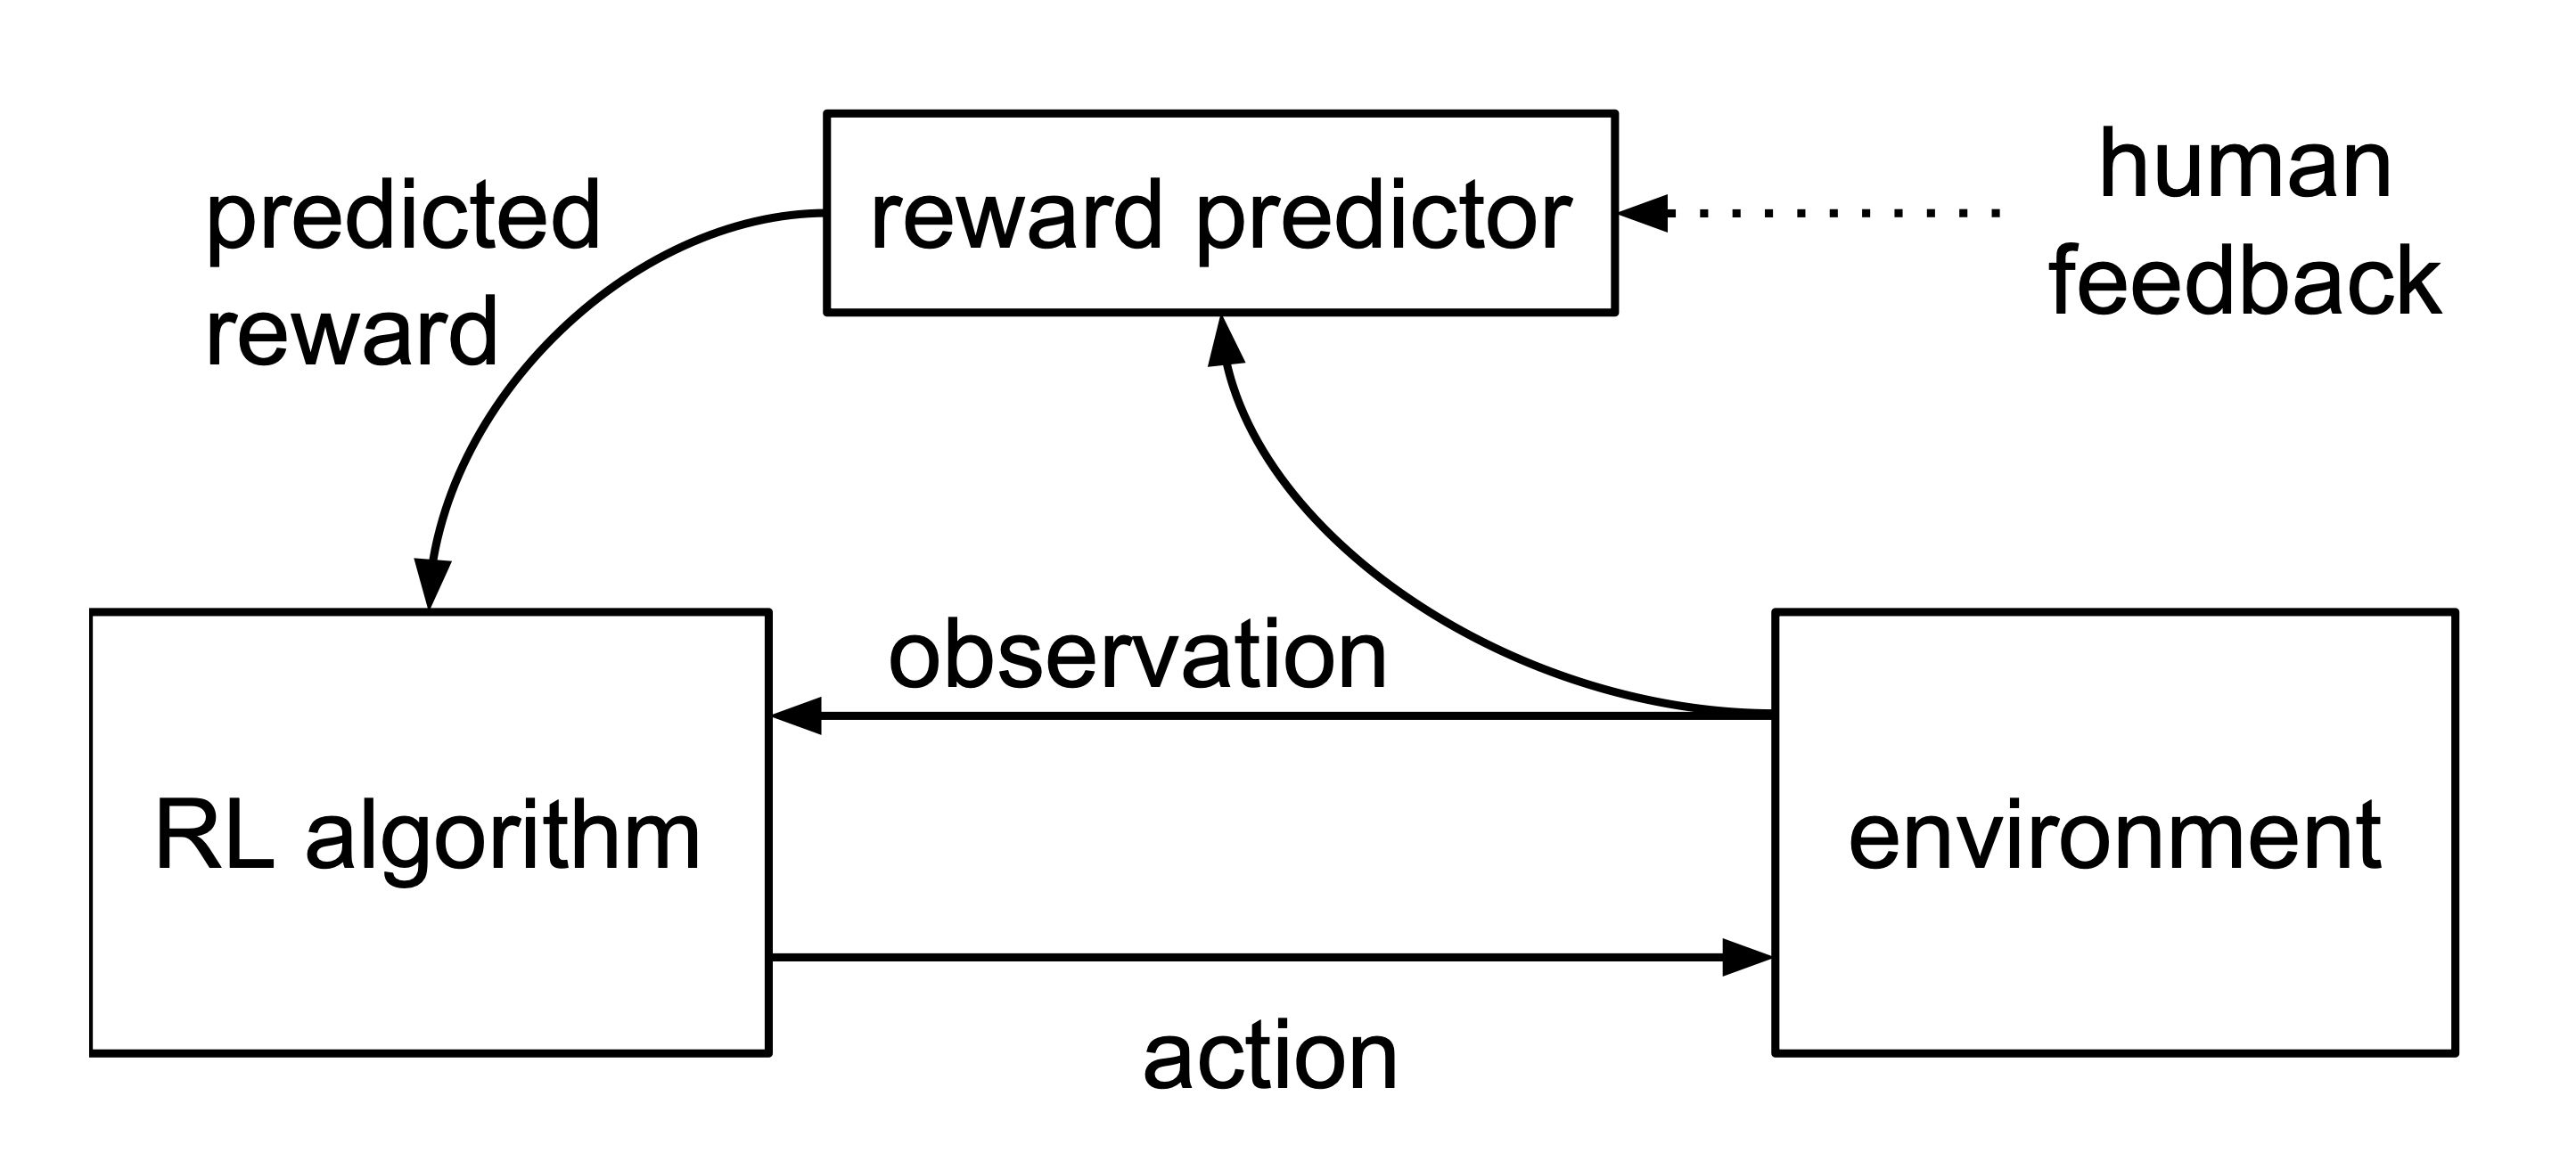 Figure 1: Schematic illustration of RLHF approach: the reward predictor is trained asynchronously from comparisons of trajectory segments, and the agent maximizes predicted reward.